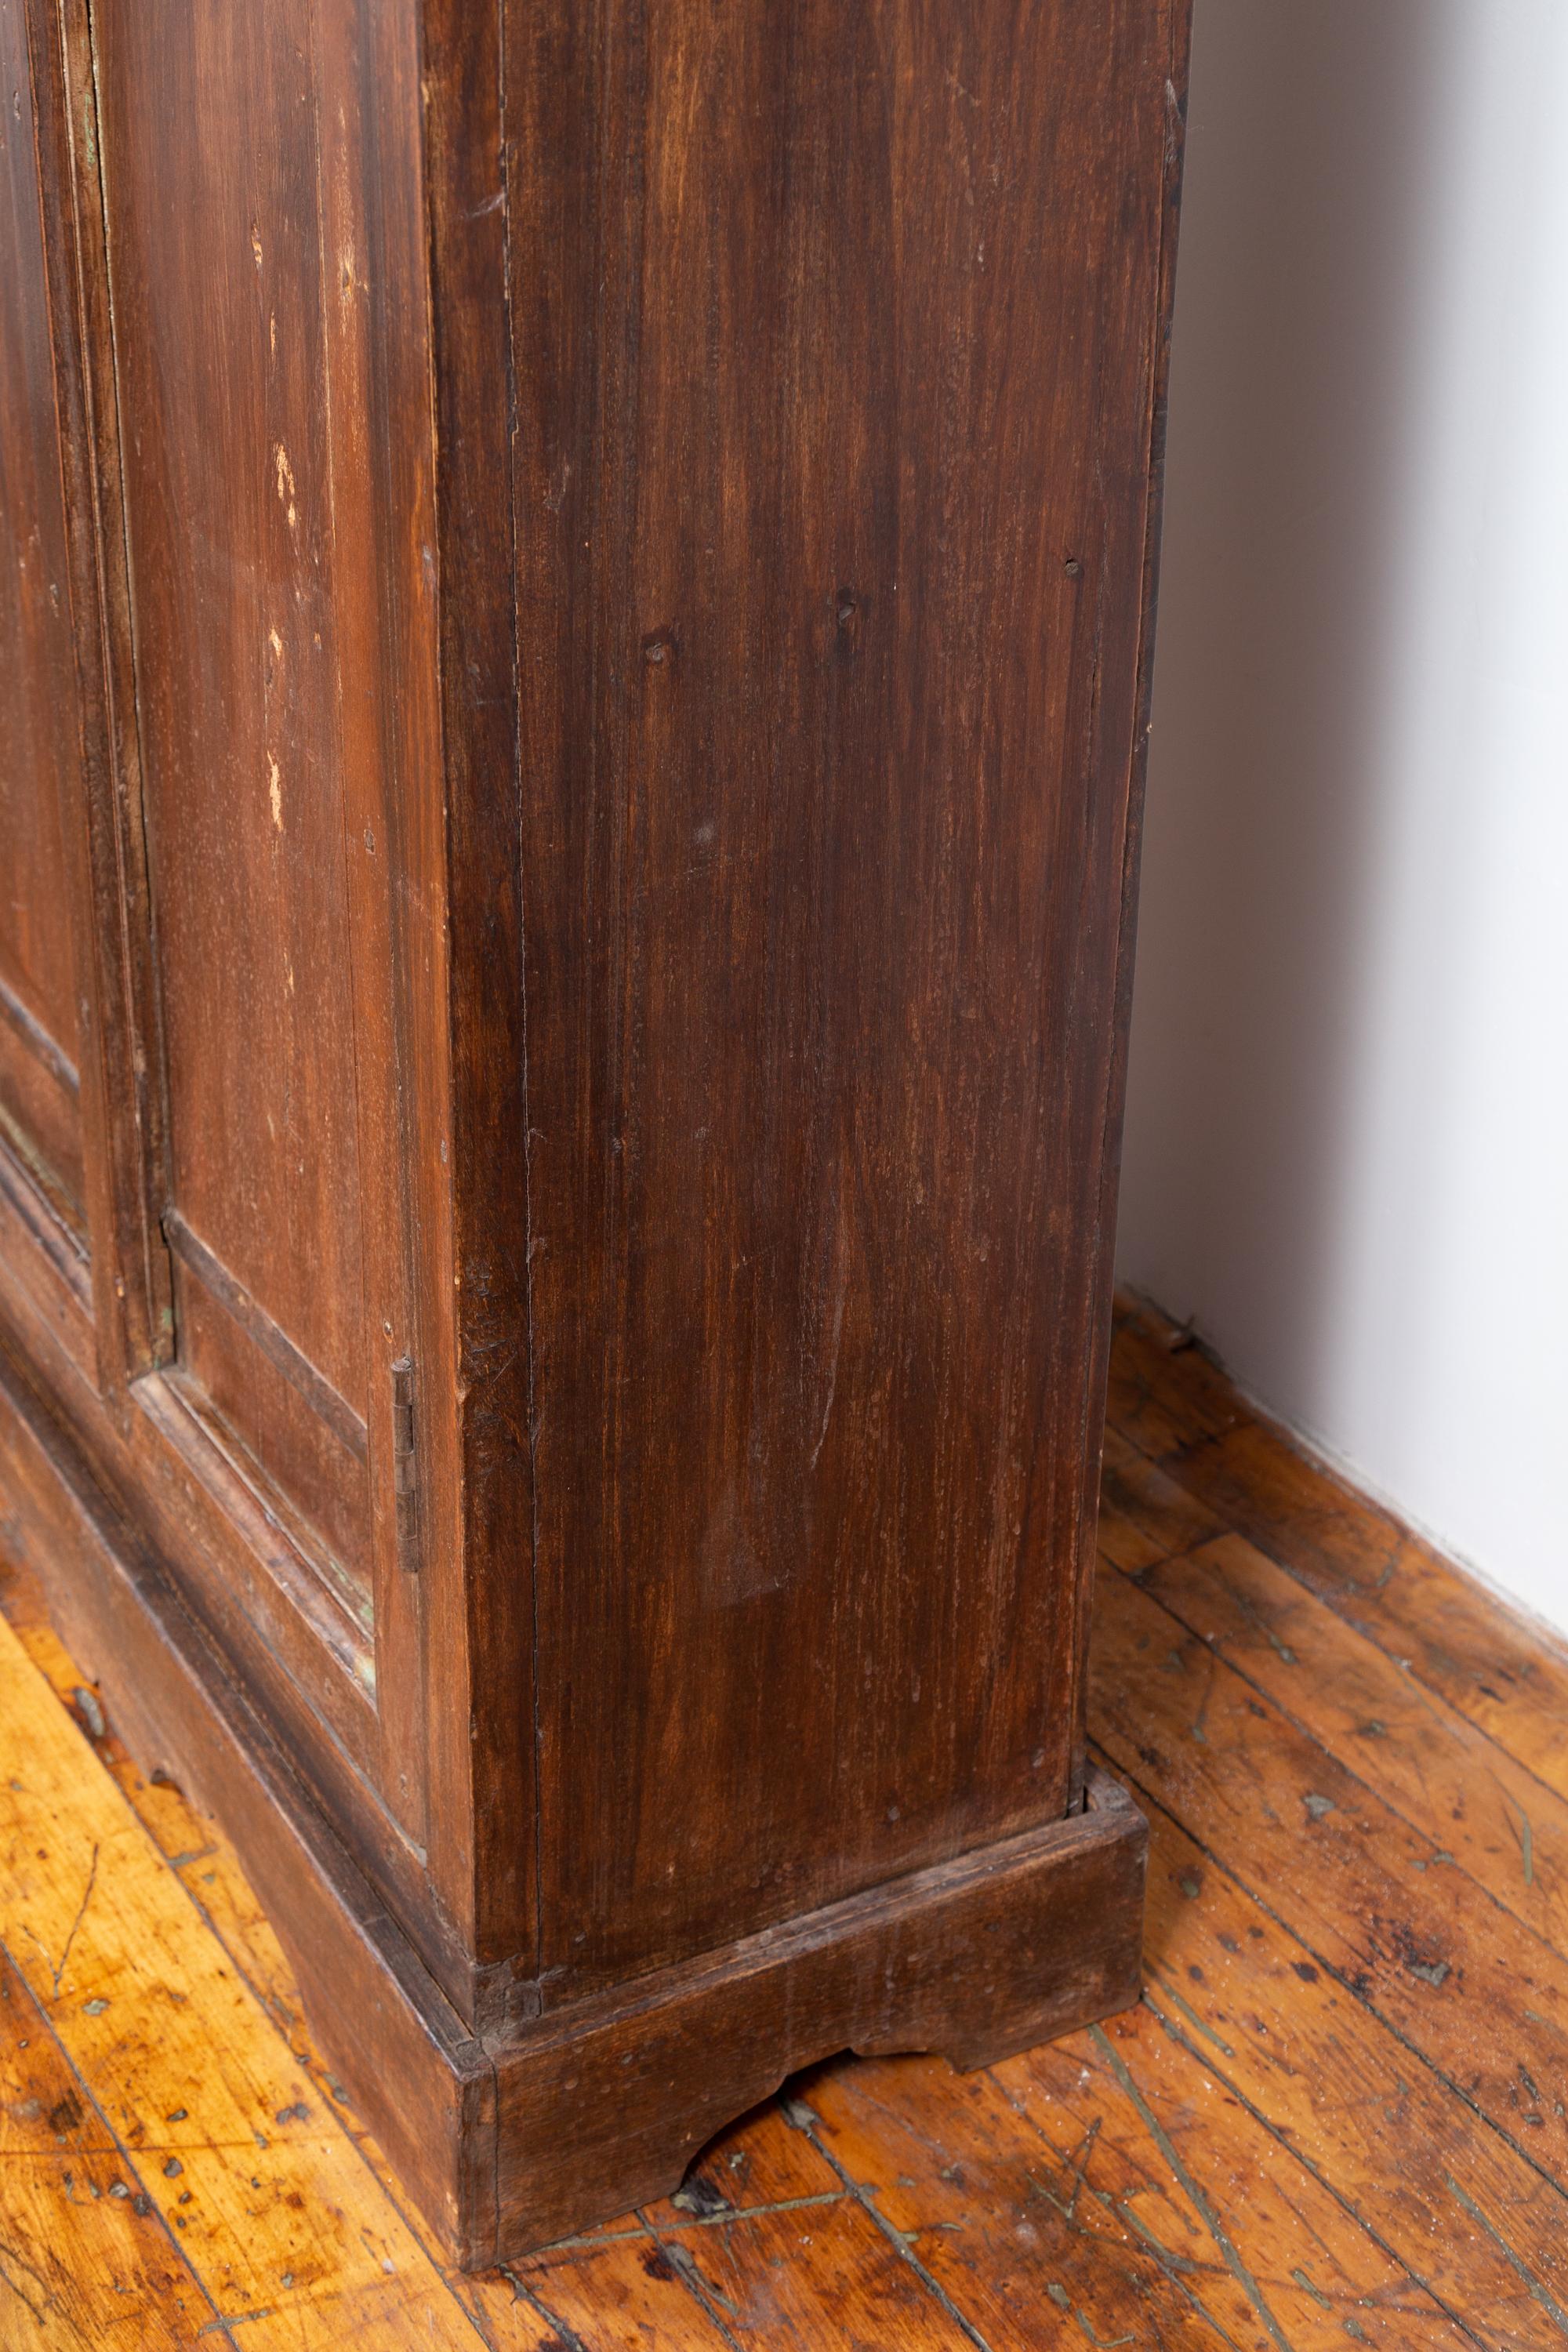 Indian Antique Wooden Armoire with Paneled Doors, Metal Braces and Aged Patina 9